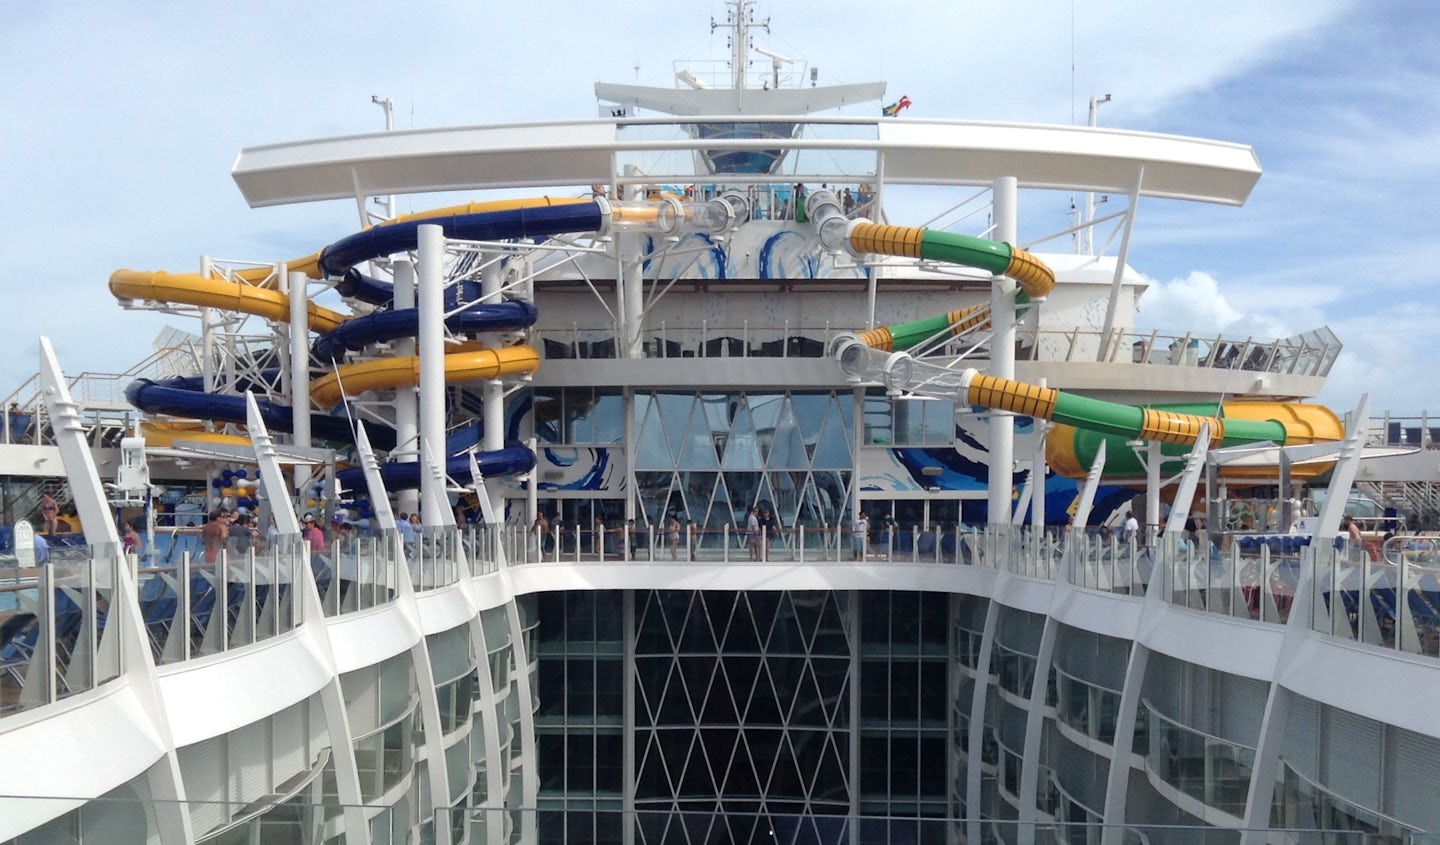 The Perfect Storm trio of water slides on Royal Caribbean